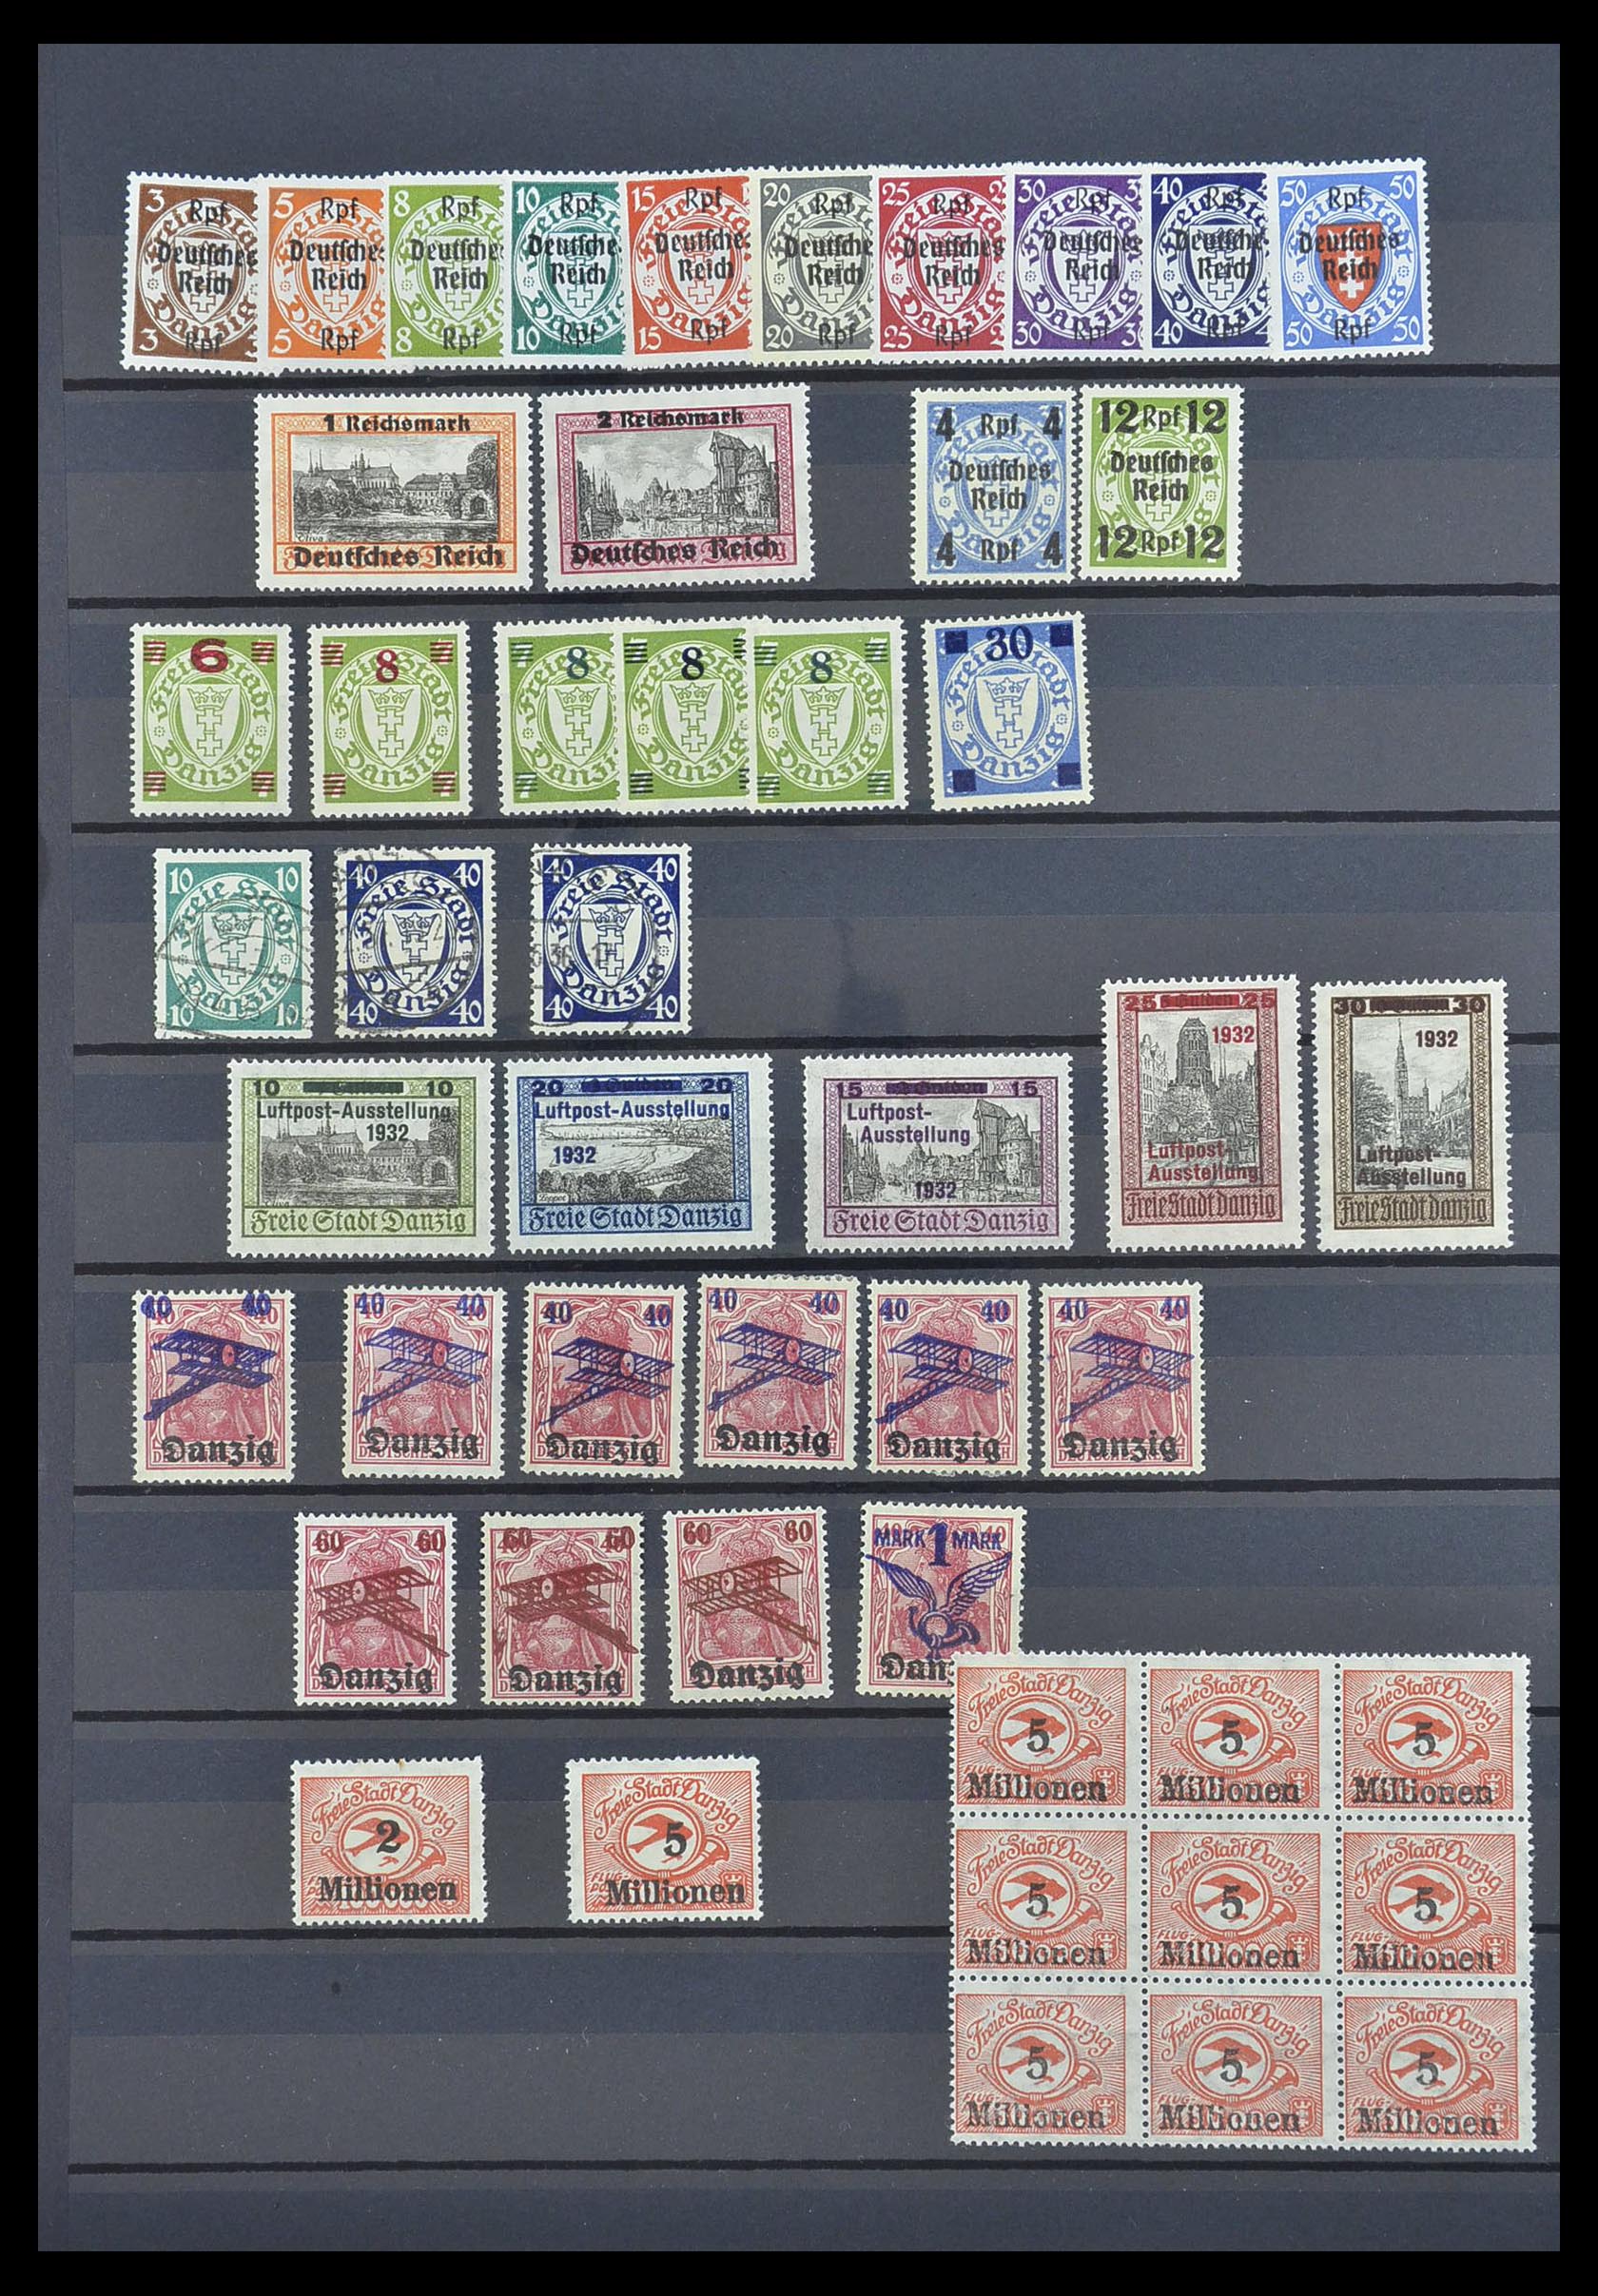 33756 087 - Stamp collection 33756 World classic 1850-1930.